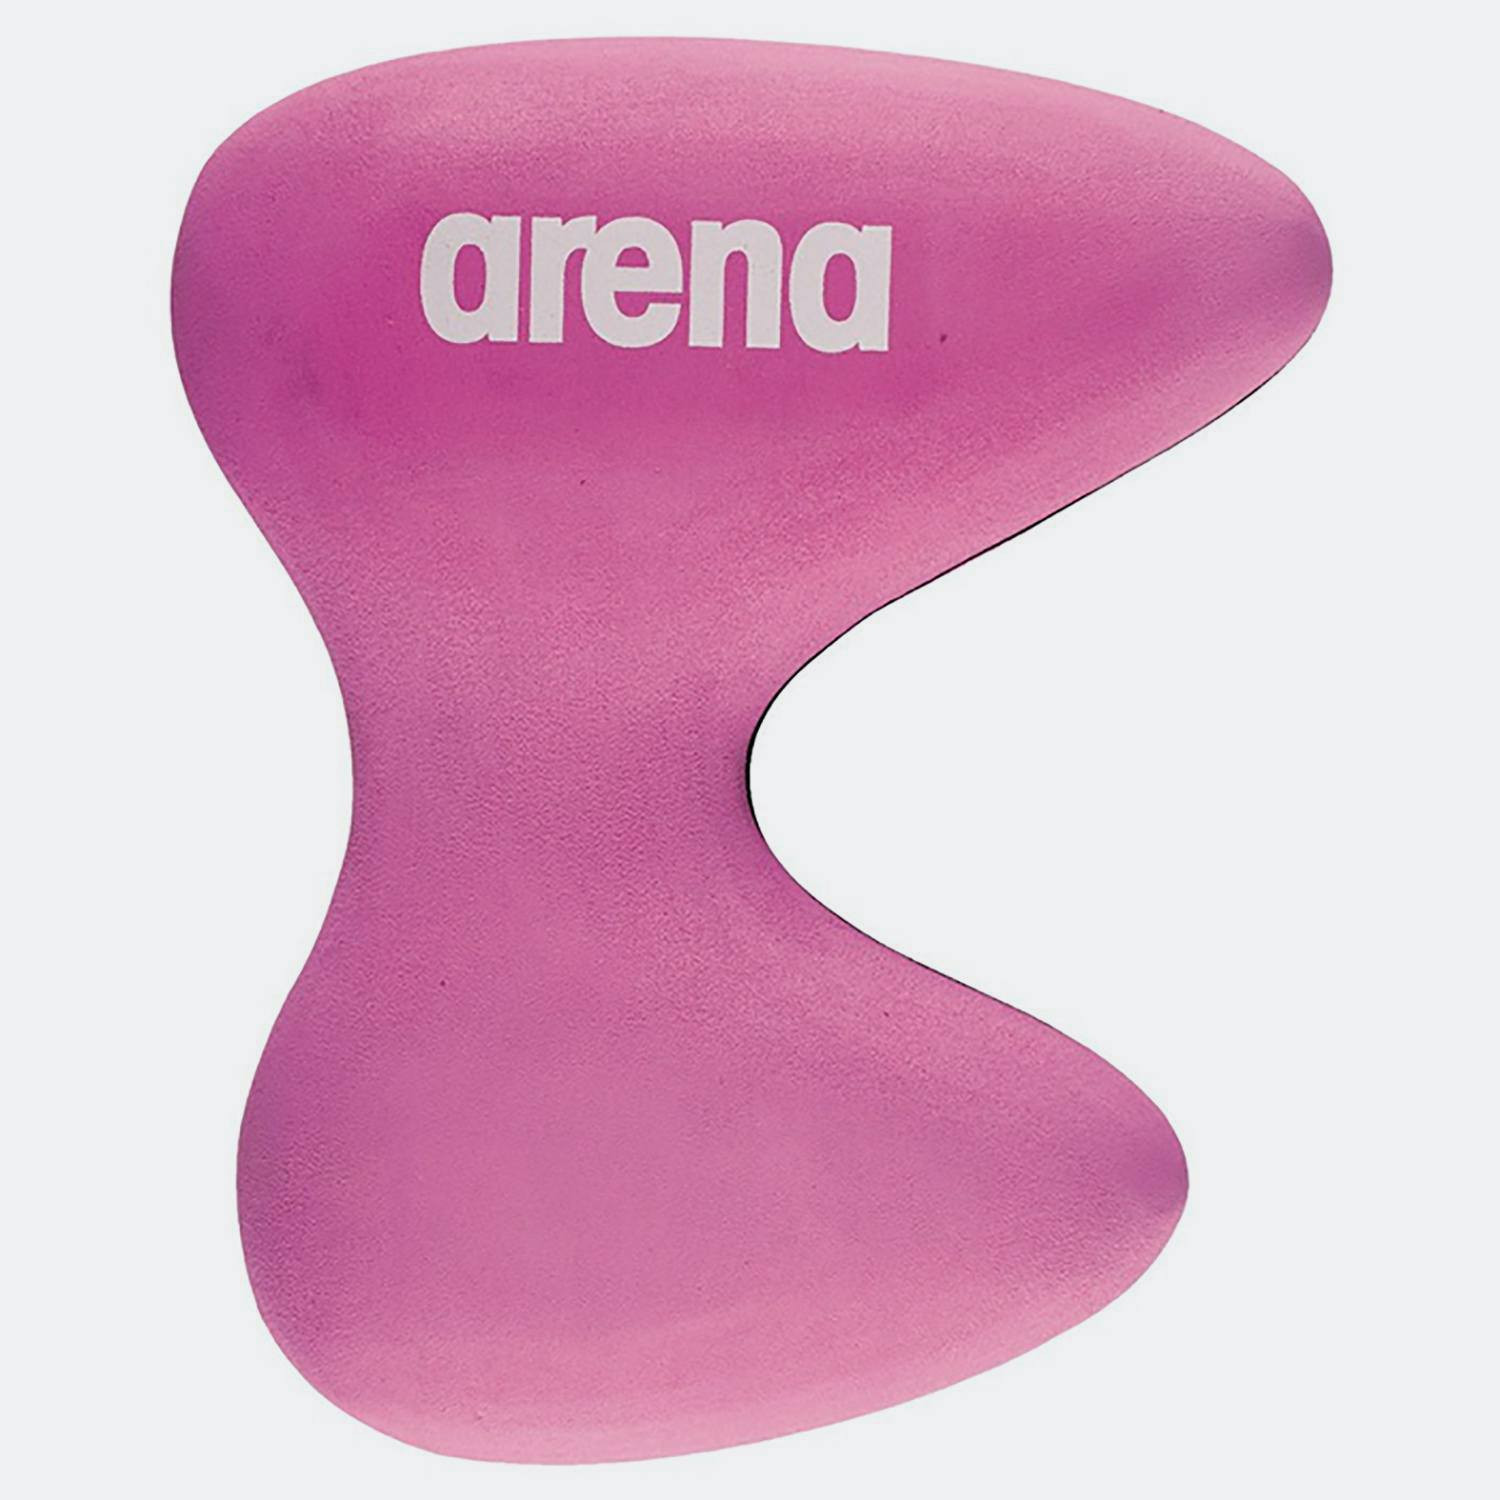 Arena Ullkick Pro Water Board - Παιδική Σανίδα (3167400012_15257) 316740001215257